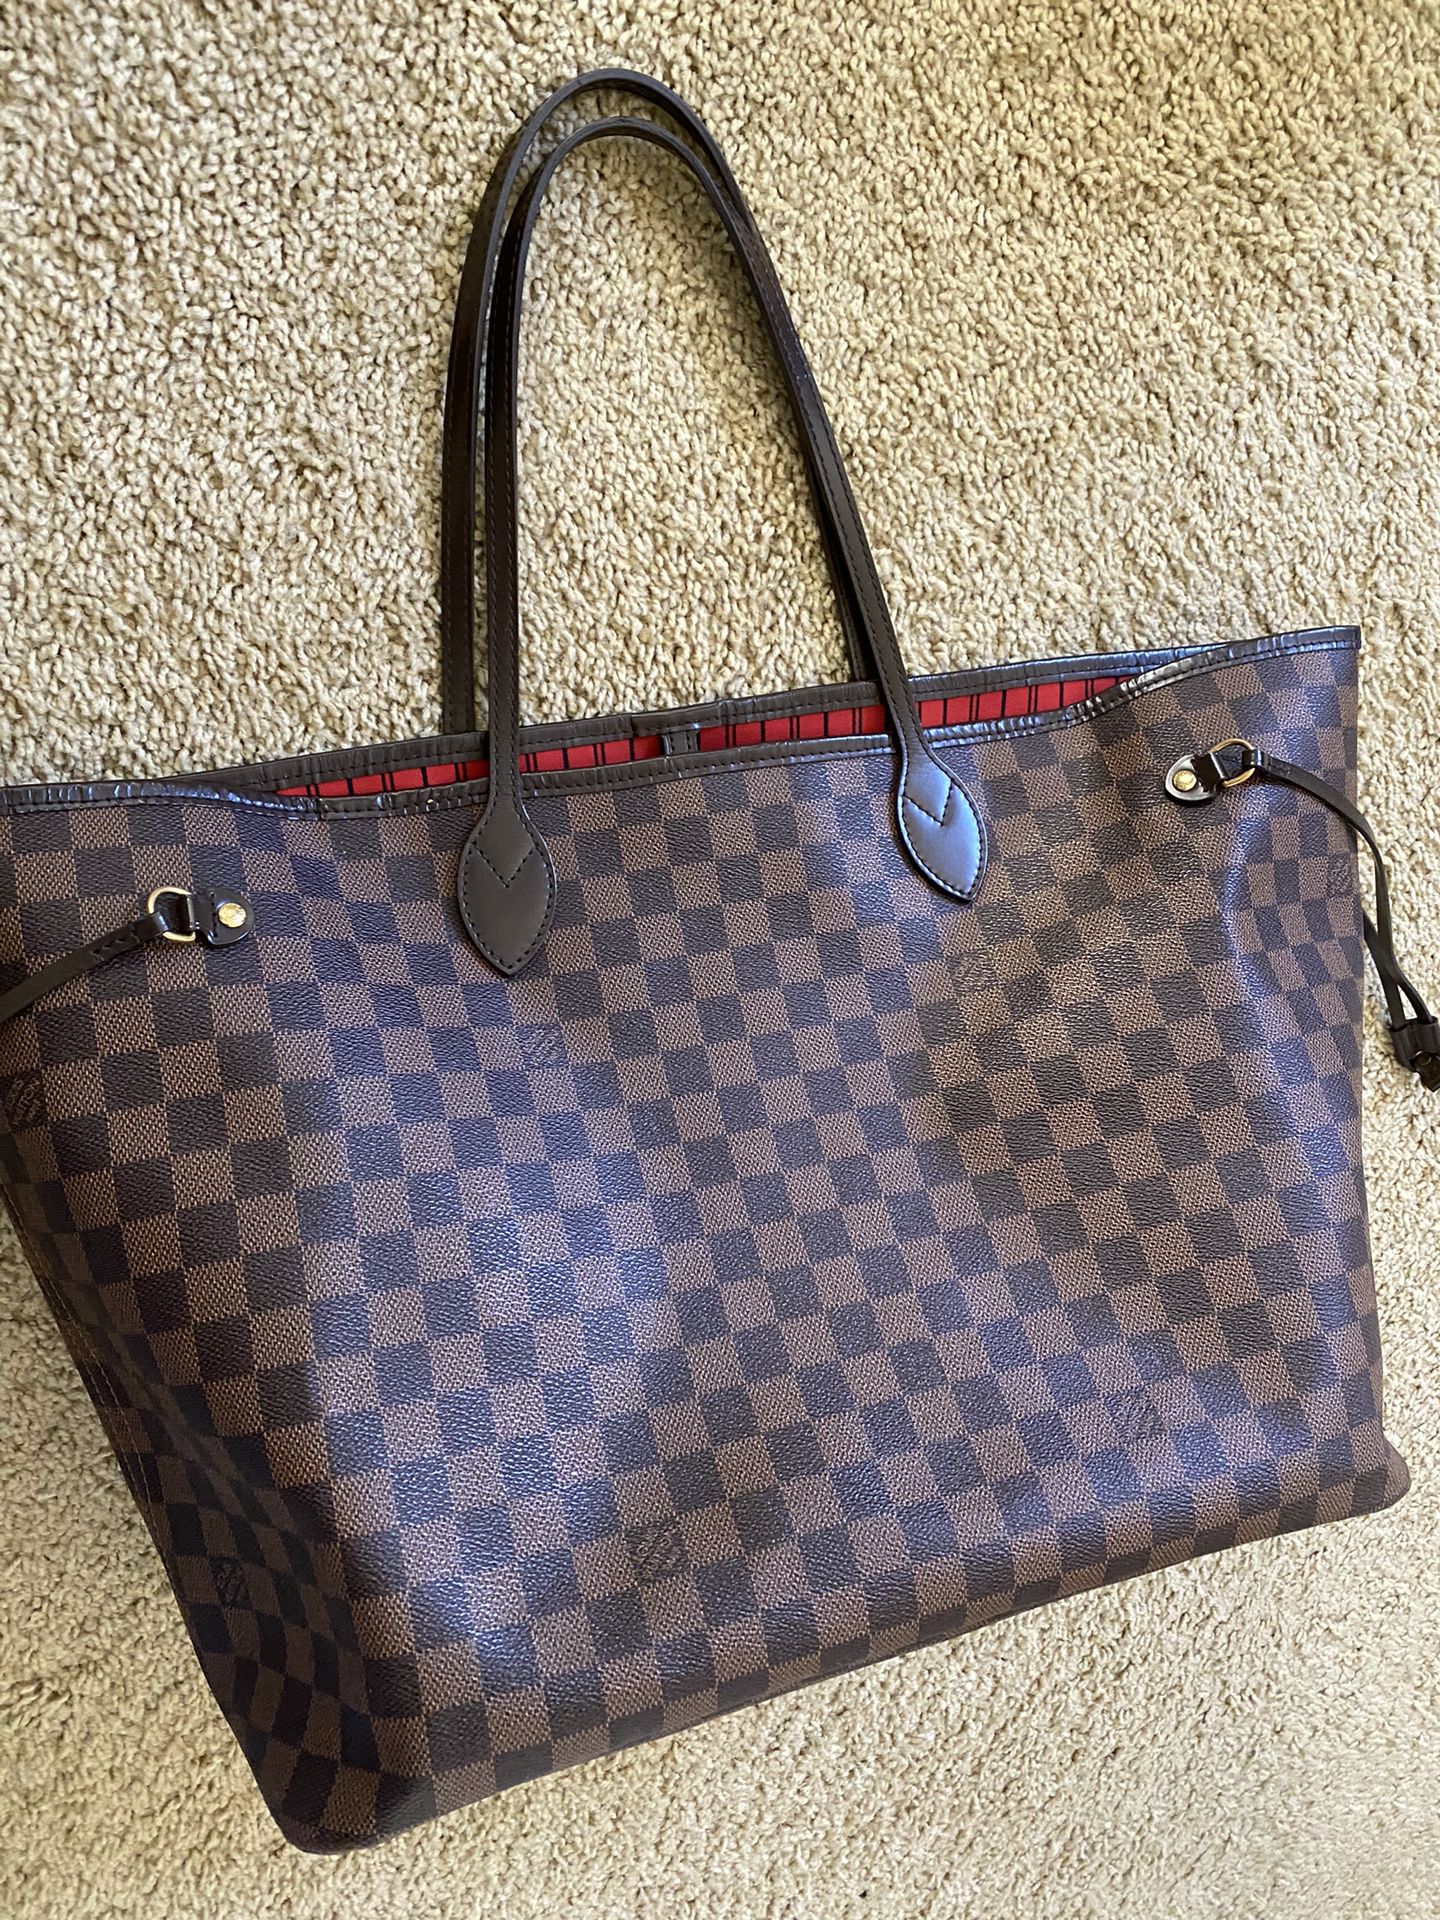 which neverfull is the biggest